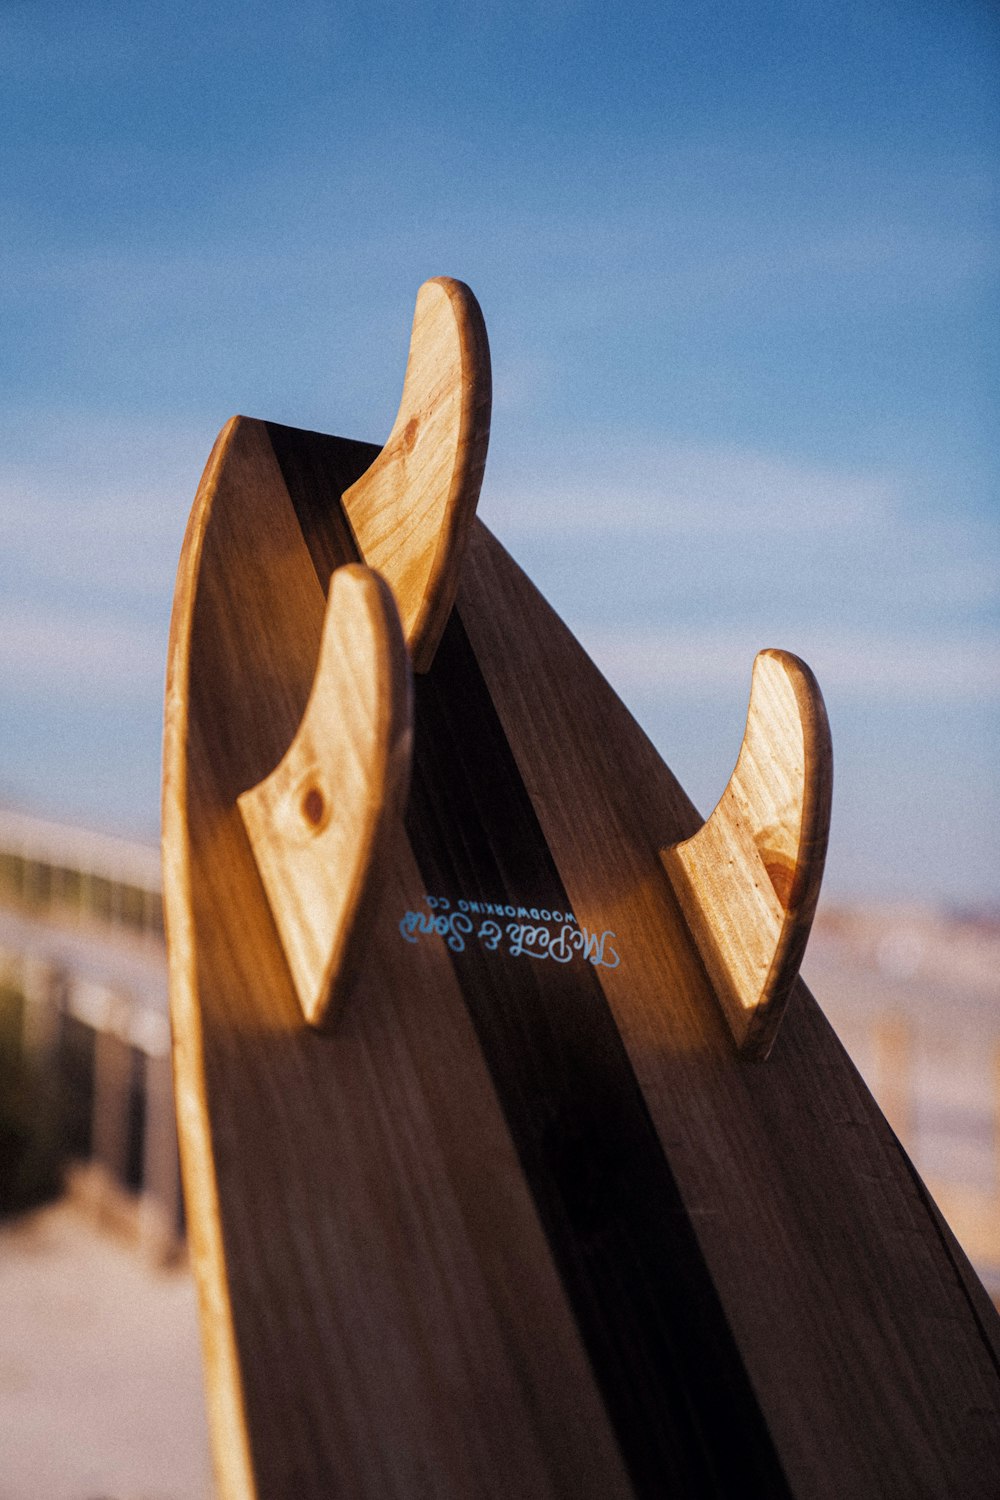 a close up of a wooden surfboard on a beach